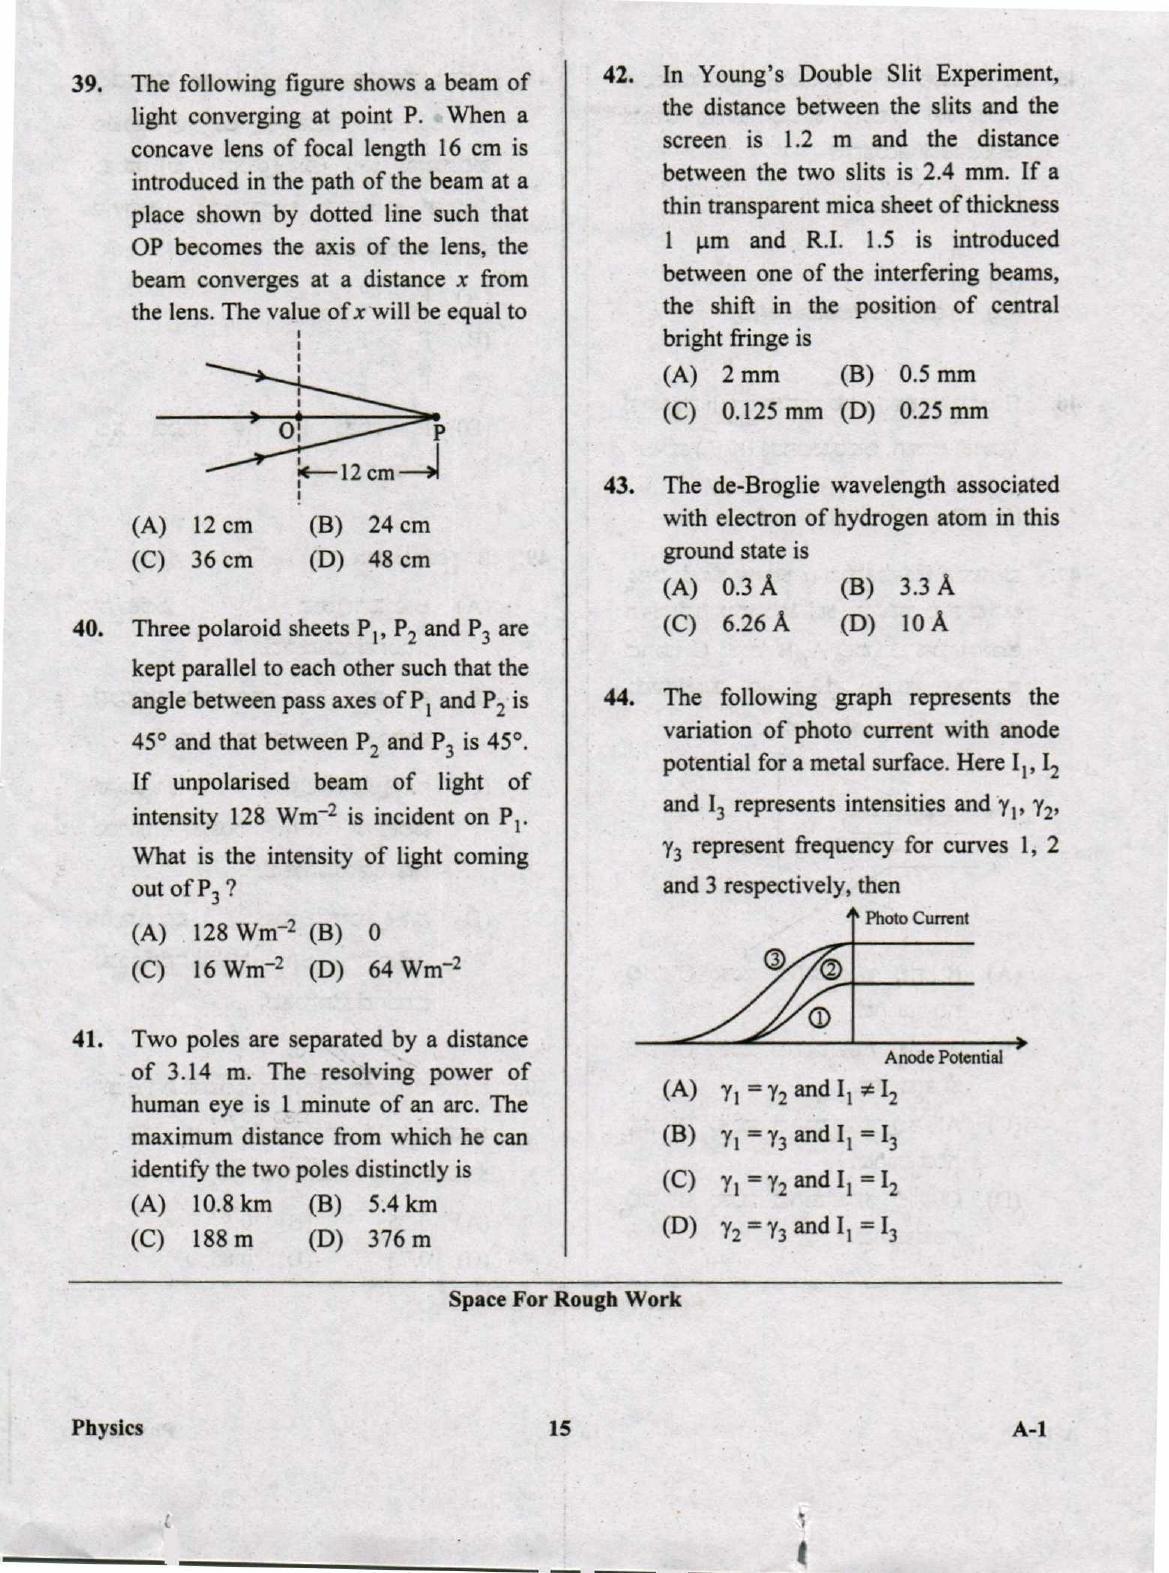 KCET Physics 2020 Question Papers - Page 15